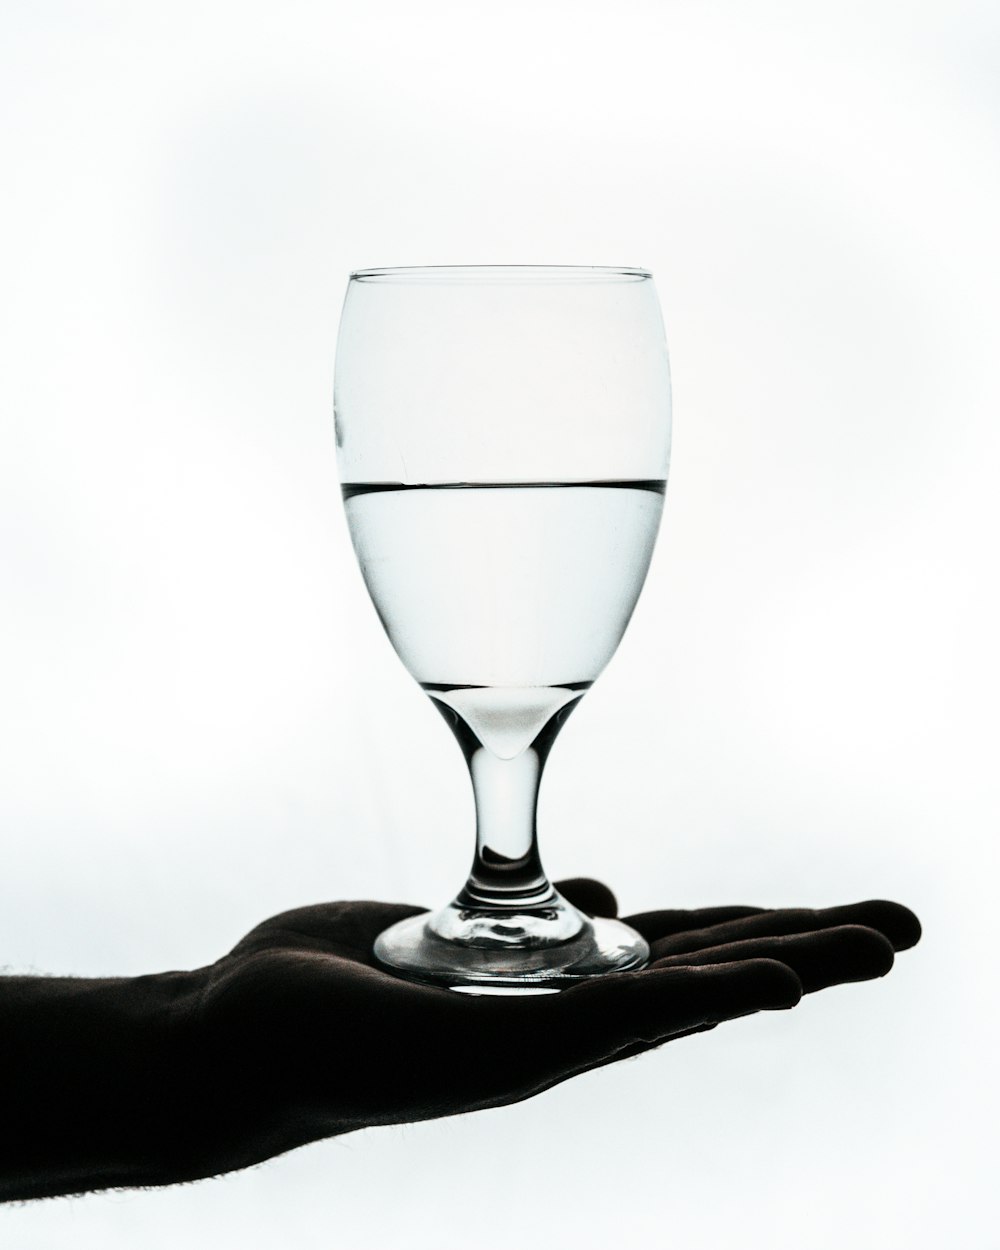 clear wine glass with water